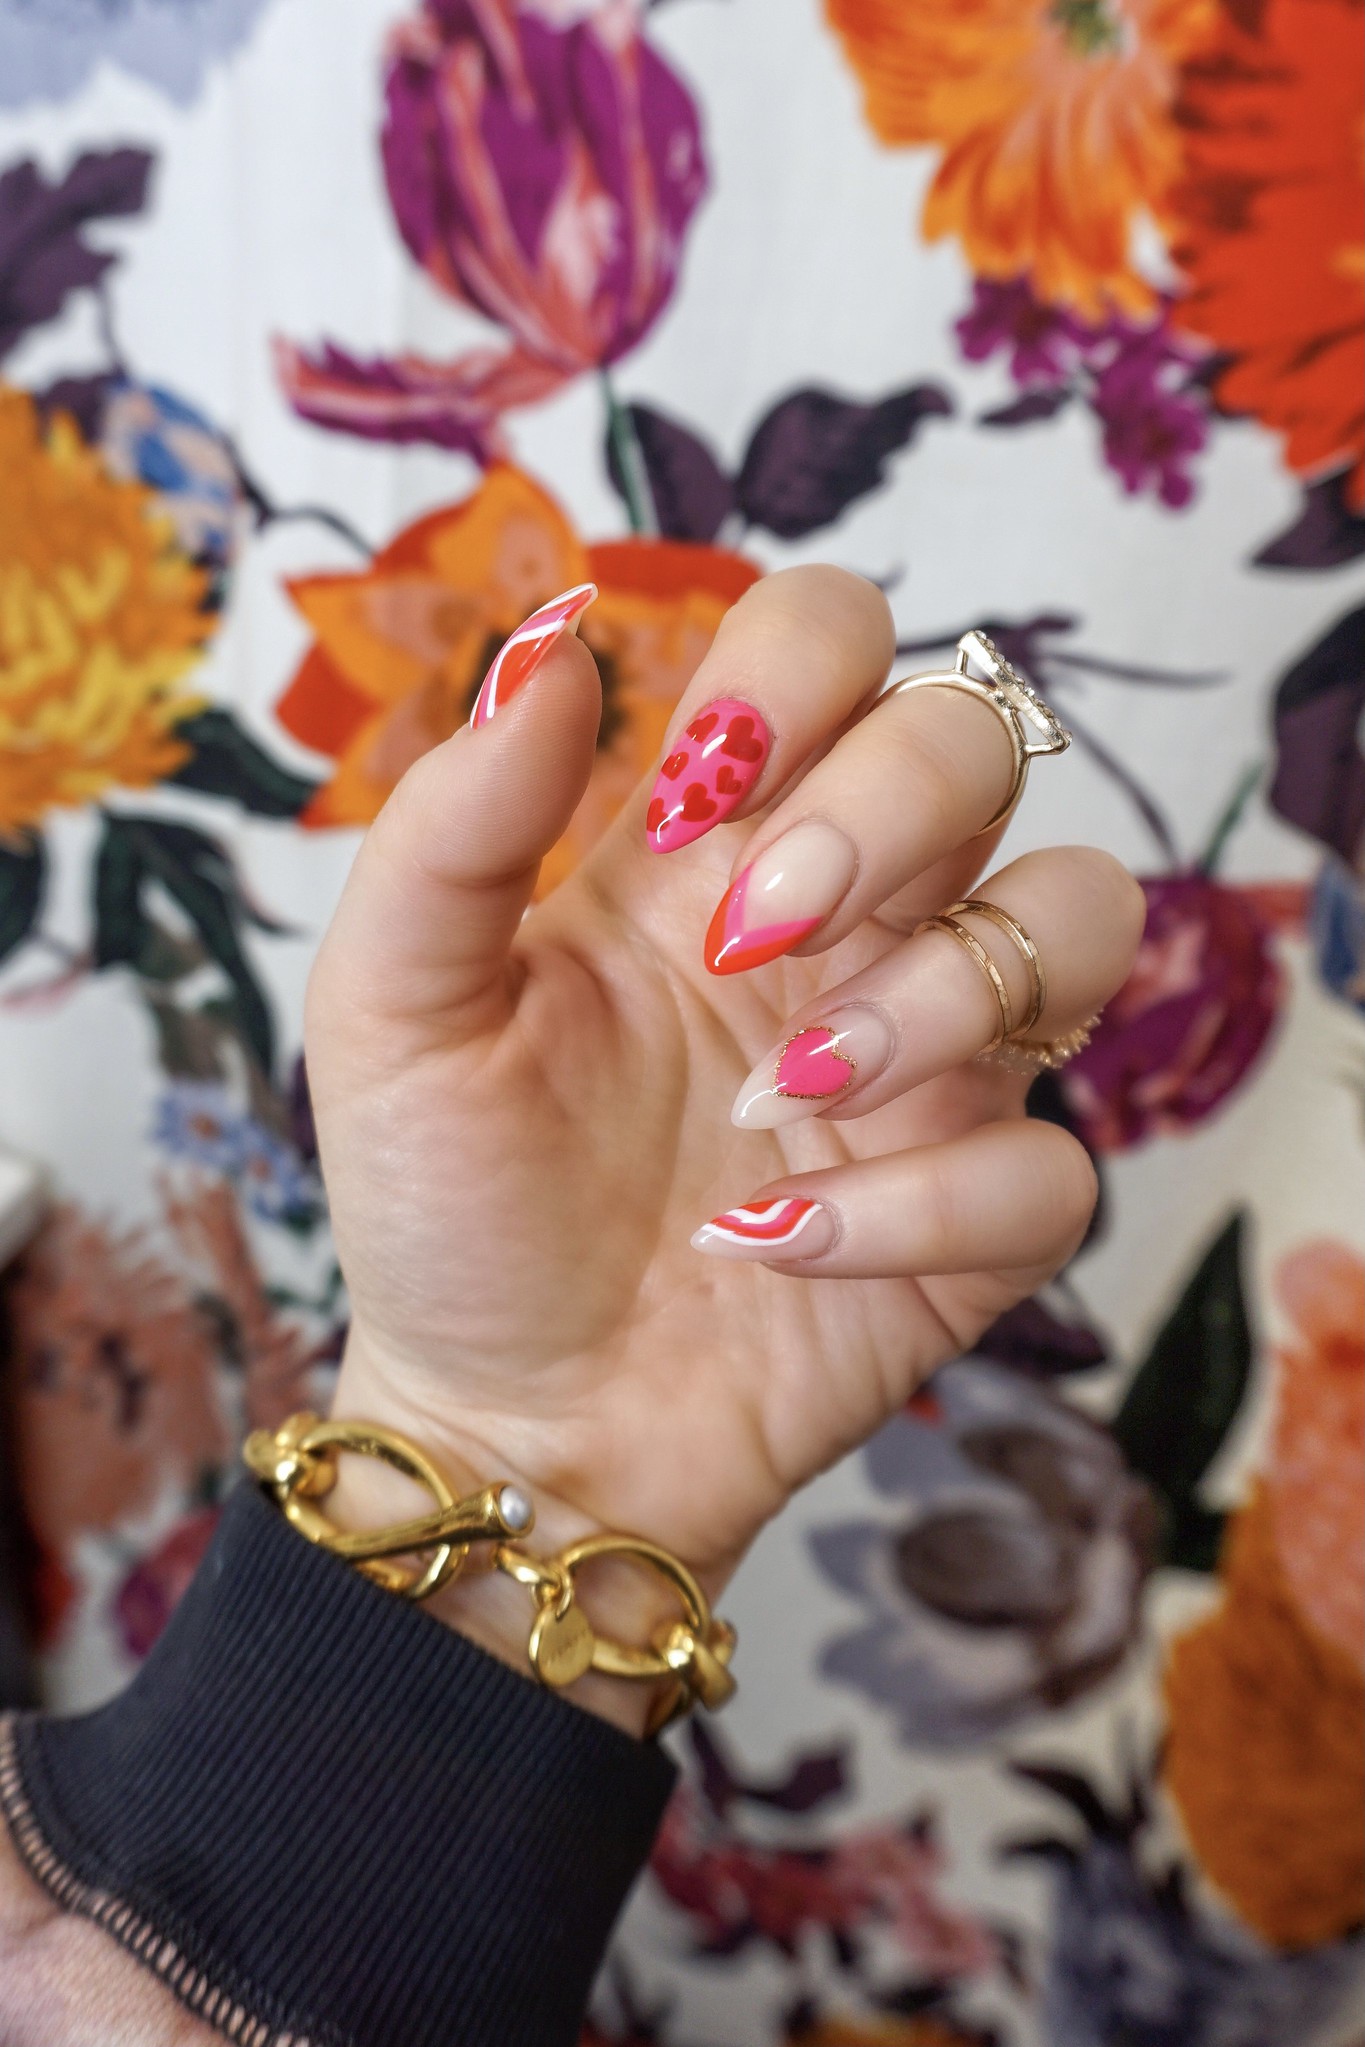 61 Cute Valentine's Day Nails Designs + Ideas In Every Vday Style